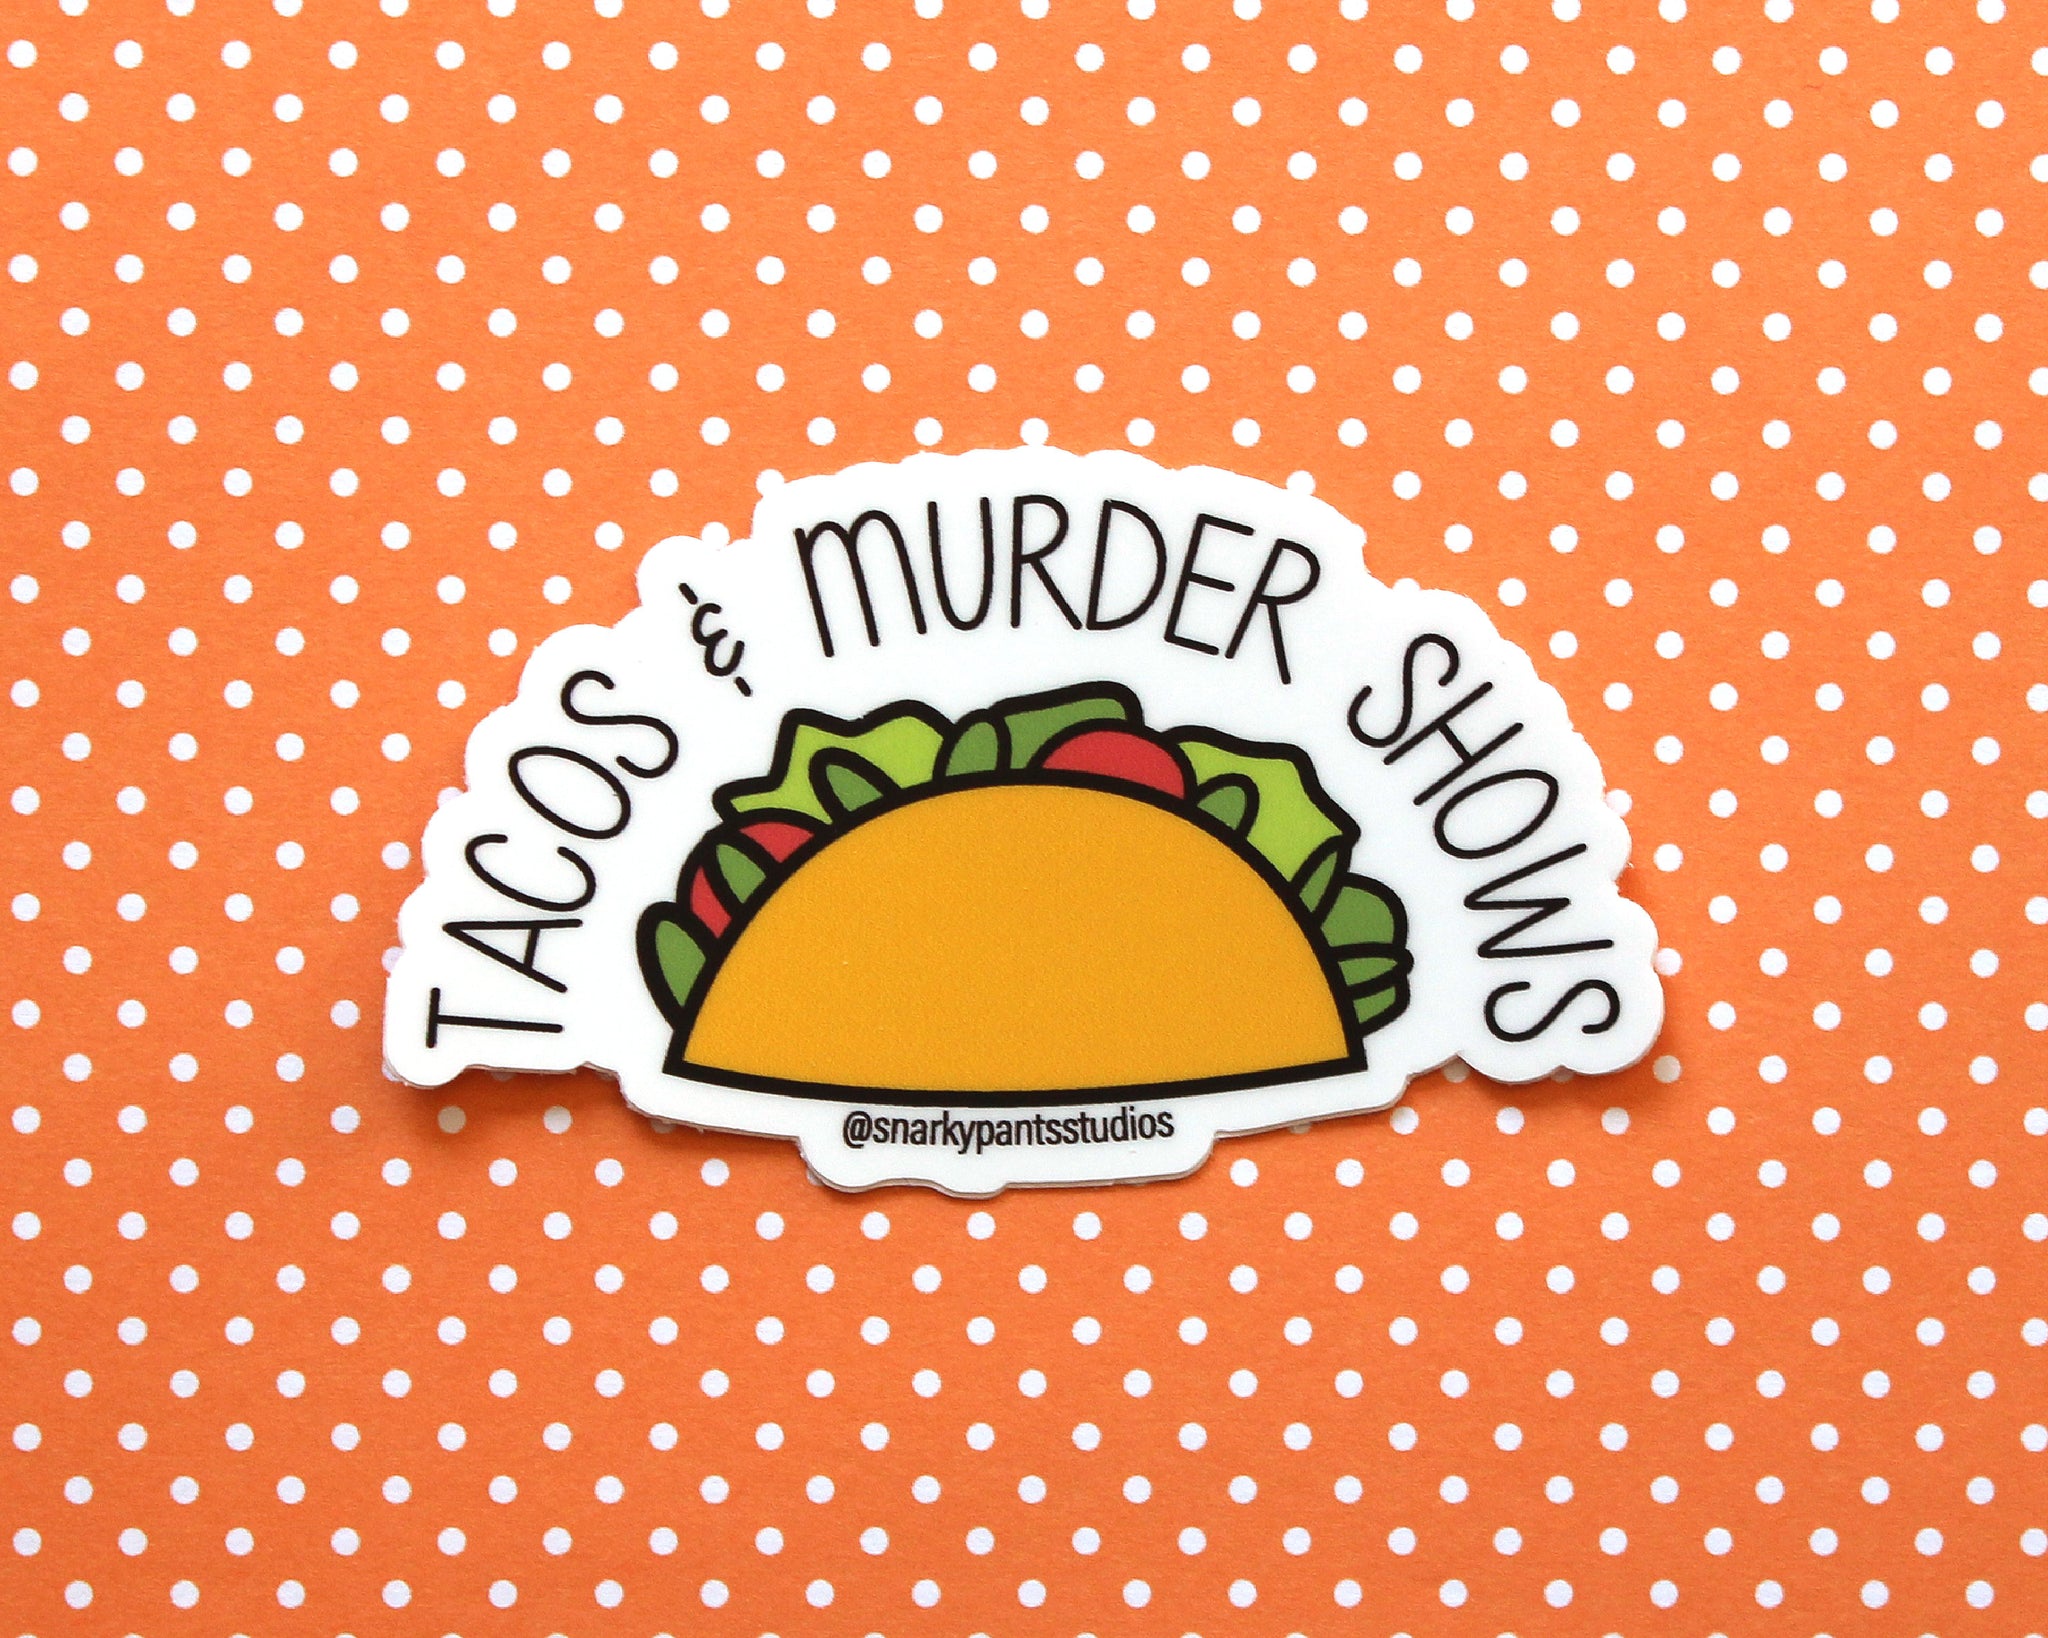 Tacos and Murder Shows Sticker, My Favorite Murder, True Crime Fans, Gifts for Taco Lovers, Laptop Sticker